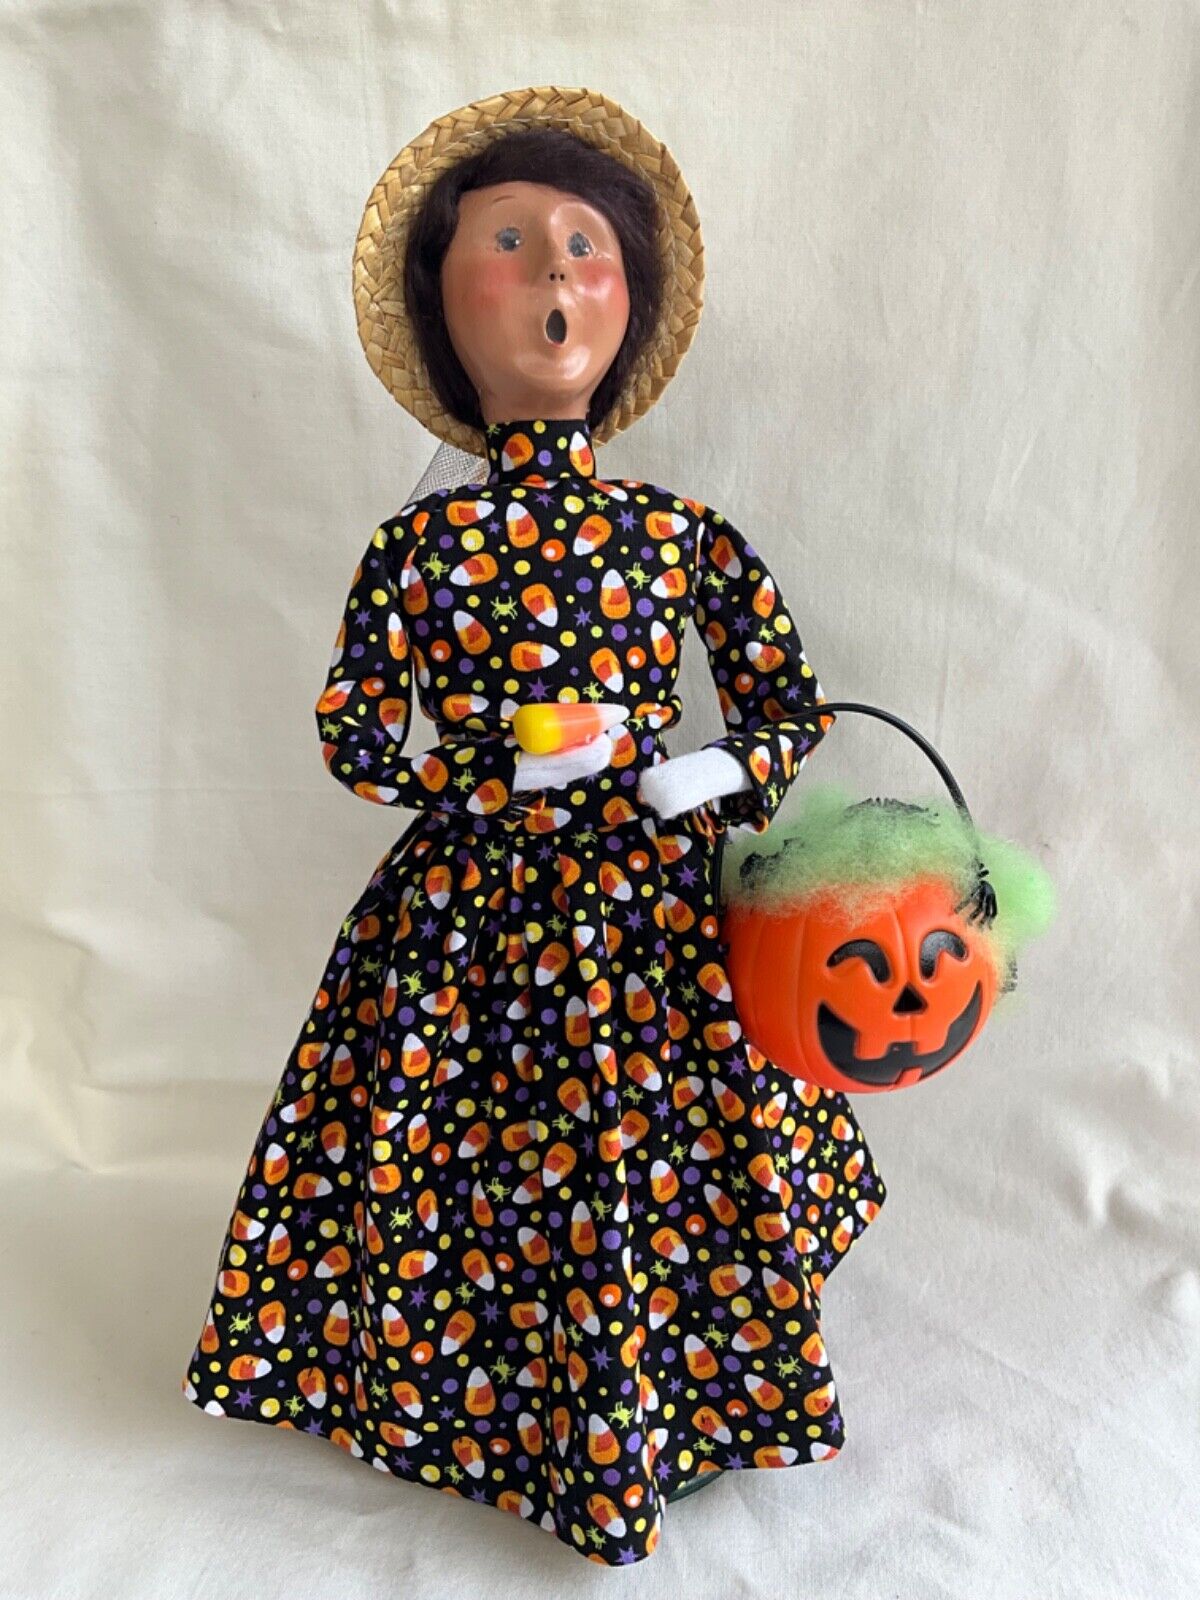 Byers Choice Woman in Candy Corn Outfit holding Pumpkin w/ Spiders  & Candy Corn